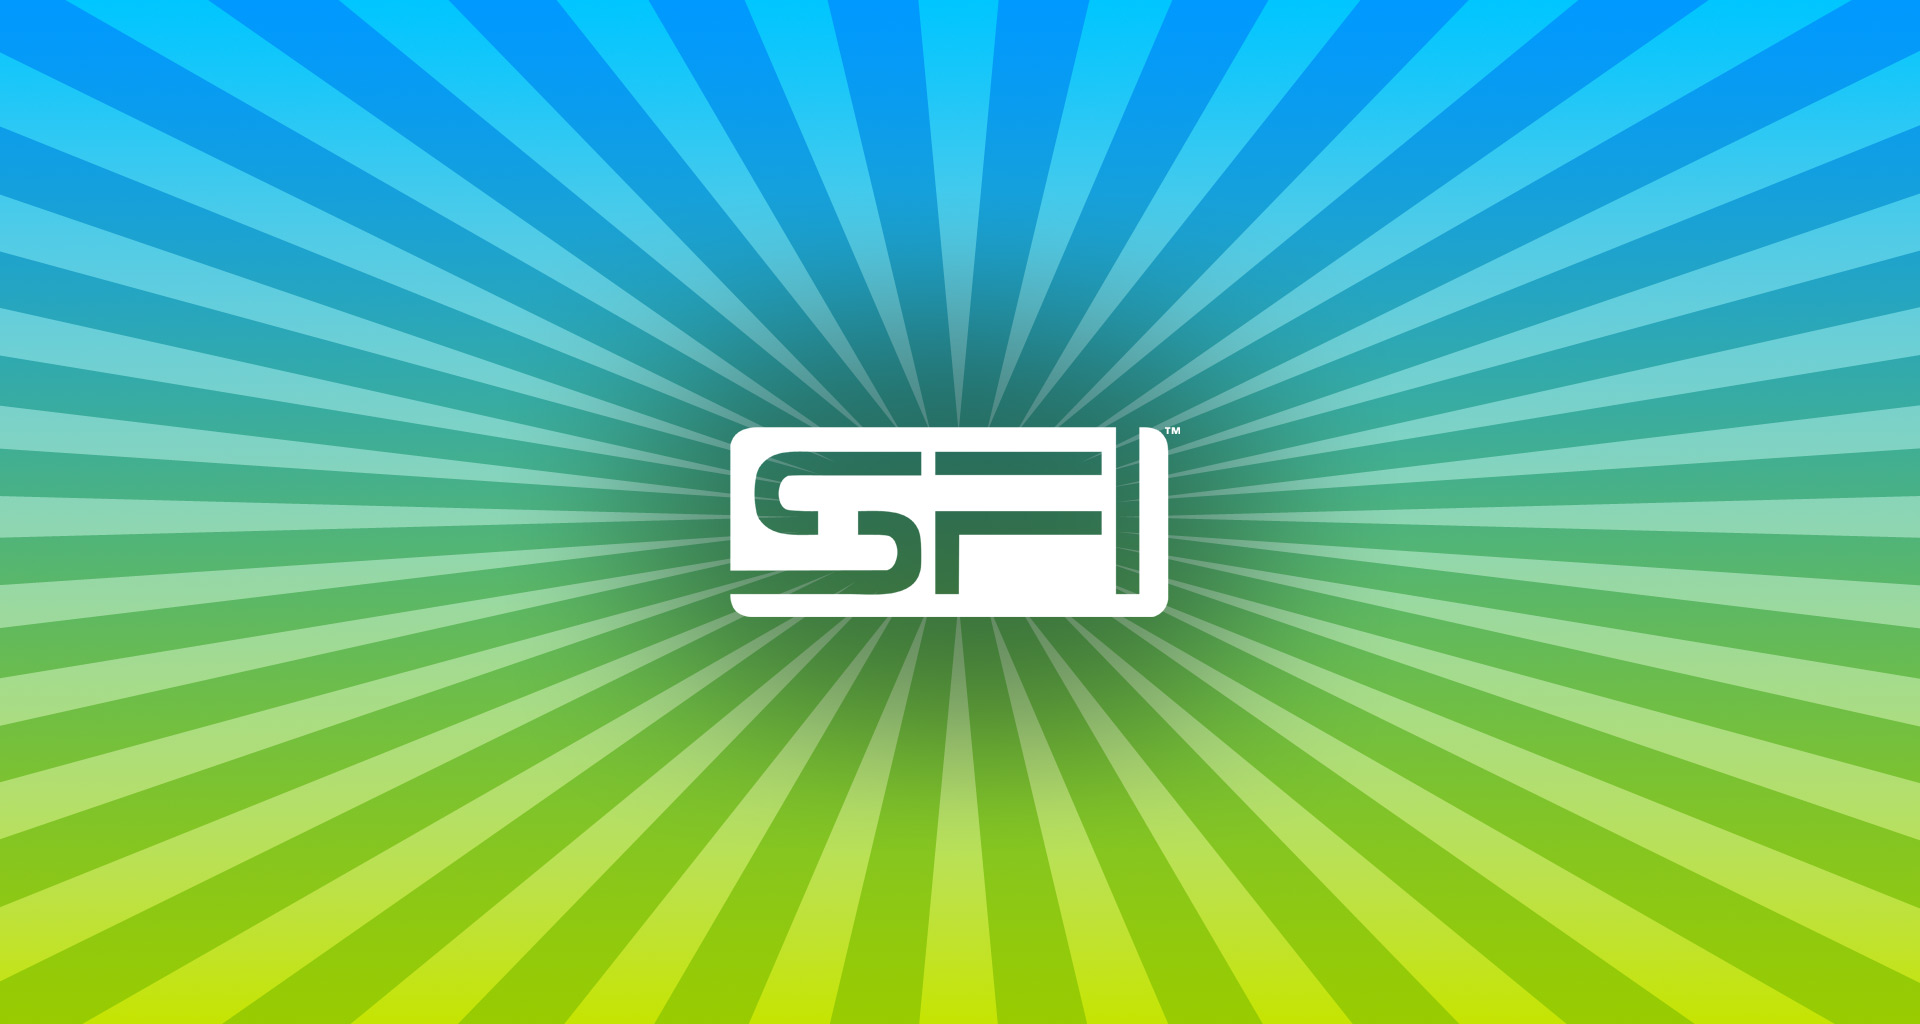 SFI Backgrounds